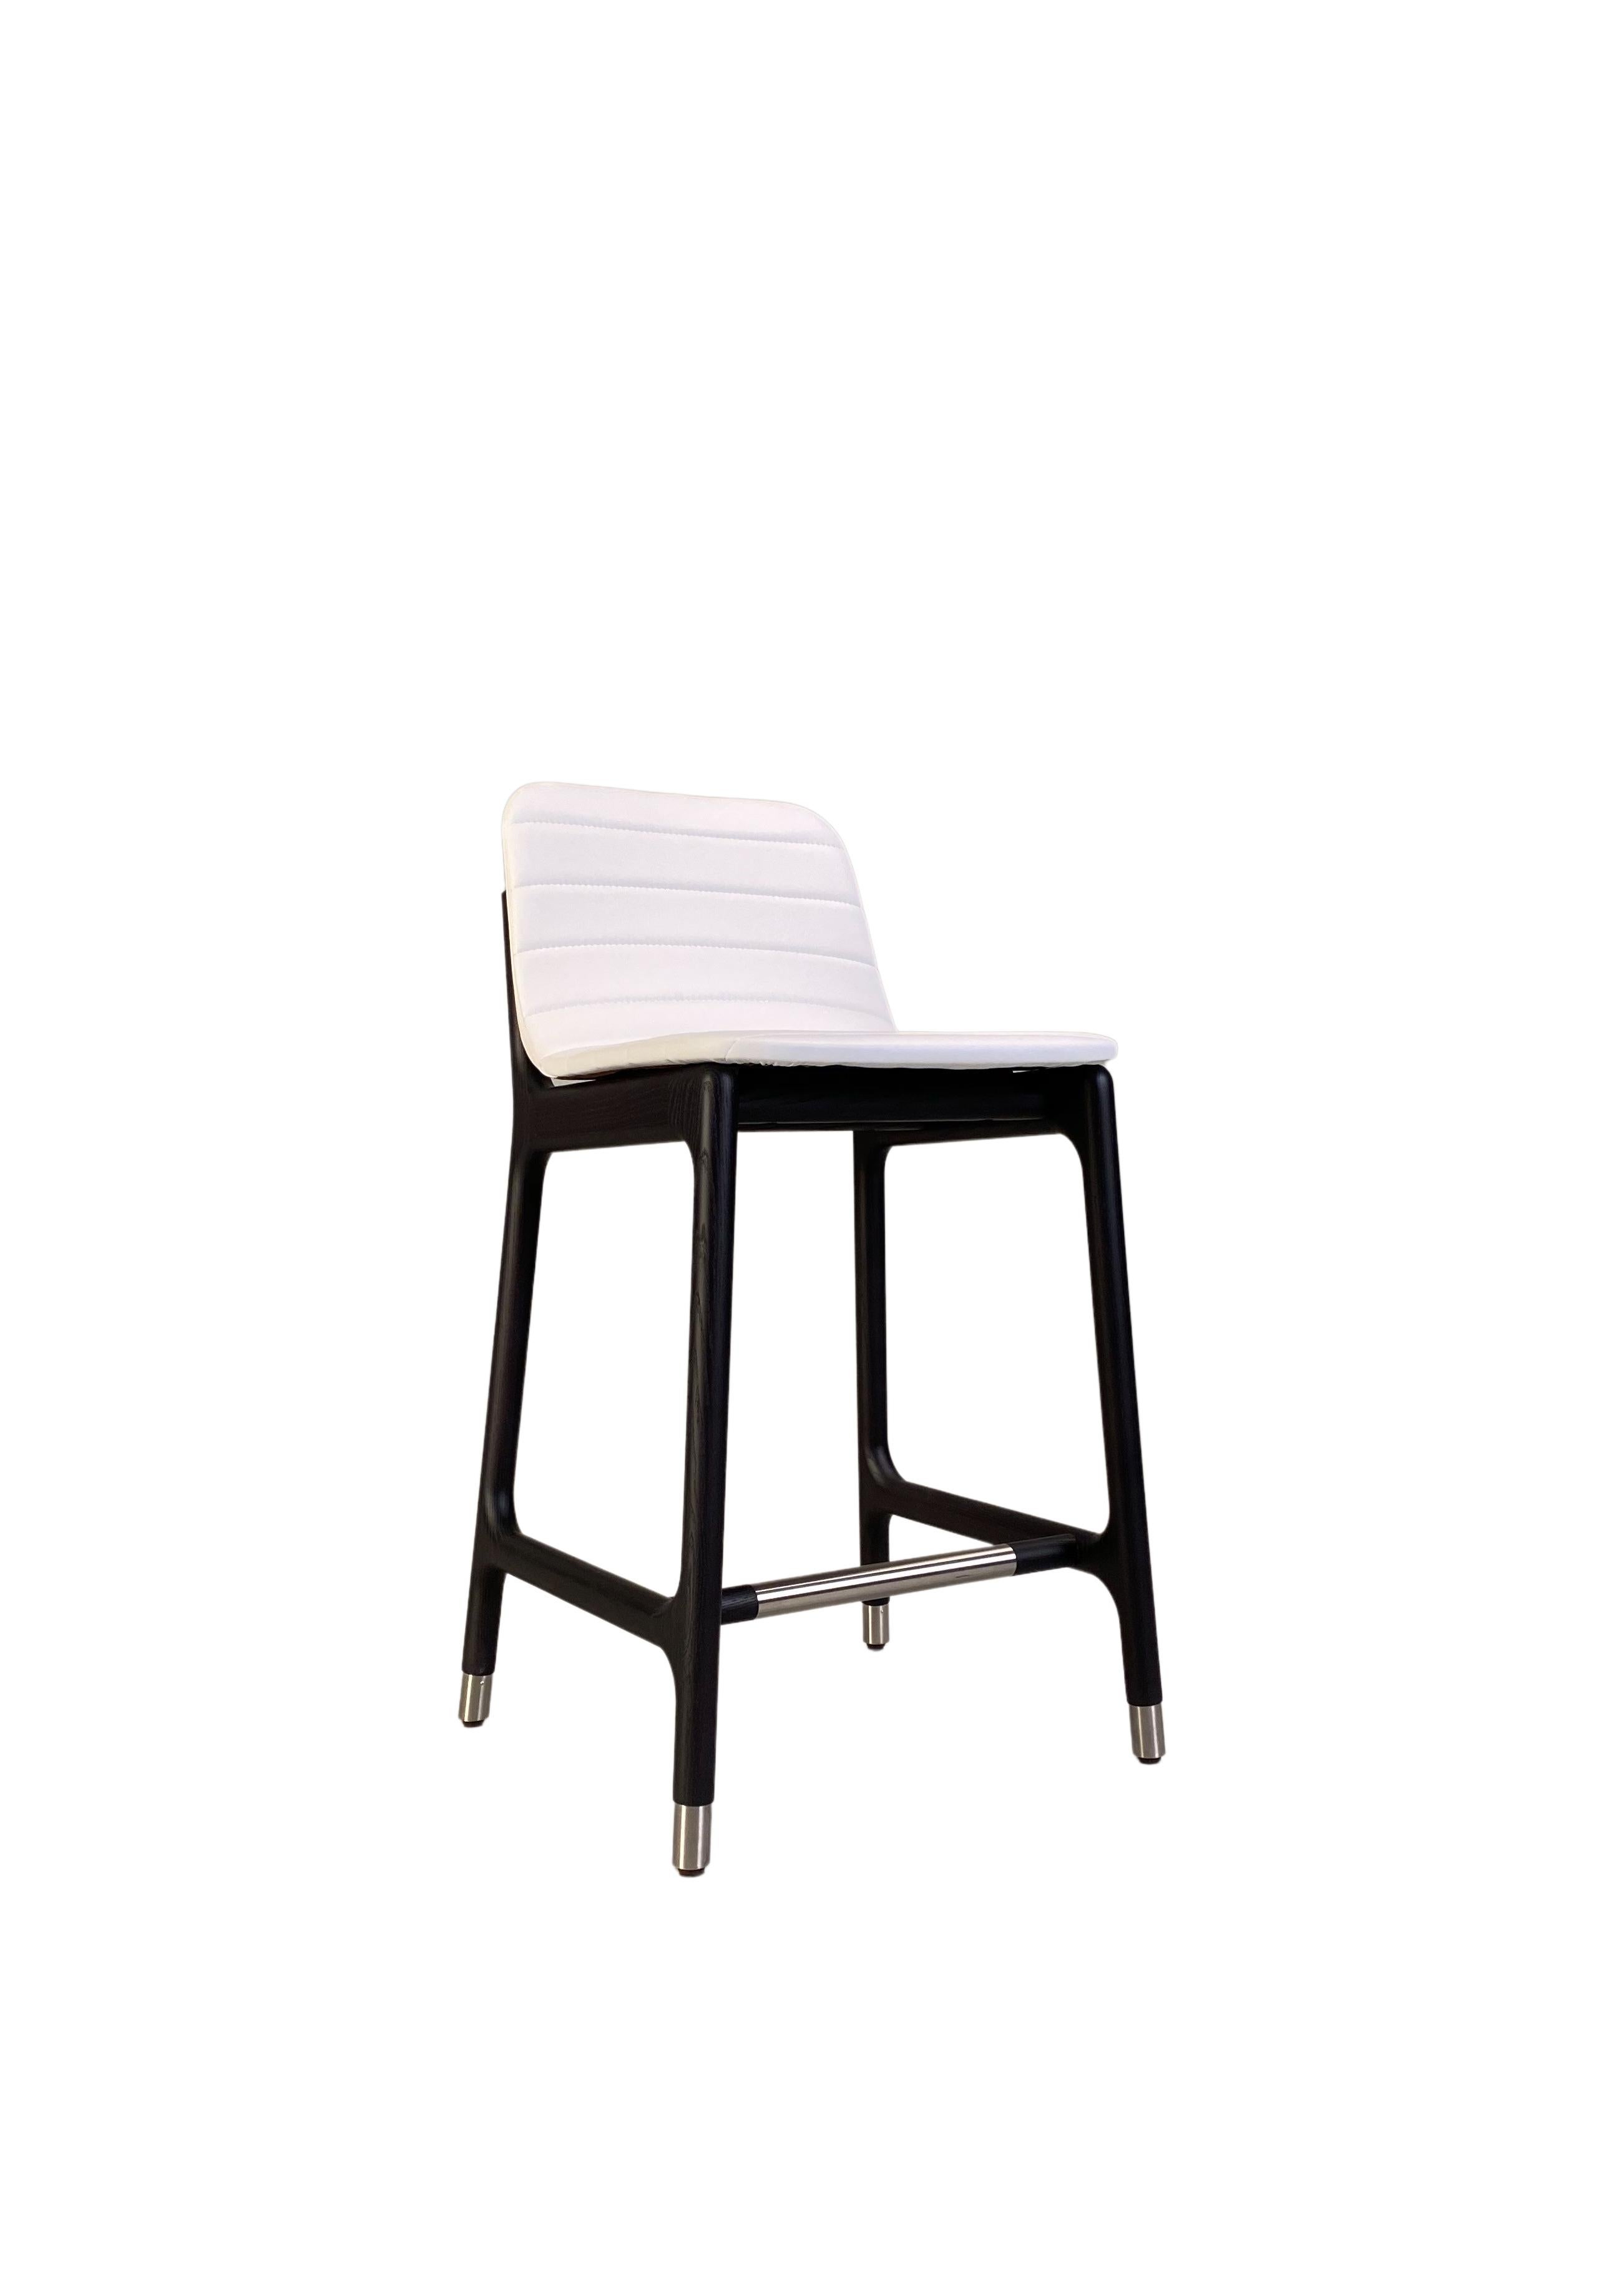 Contemporary style Joyce bar stool made of ashwood with leather or fabrics upholstered seat, and steel footrest.
Measure: Seat height 63 cm (25